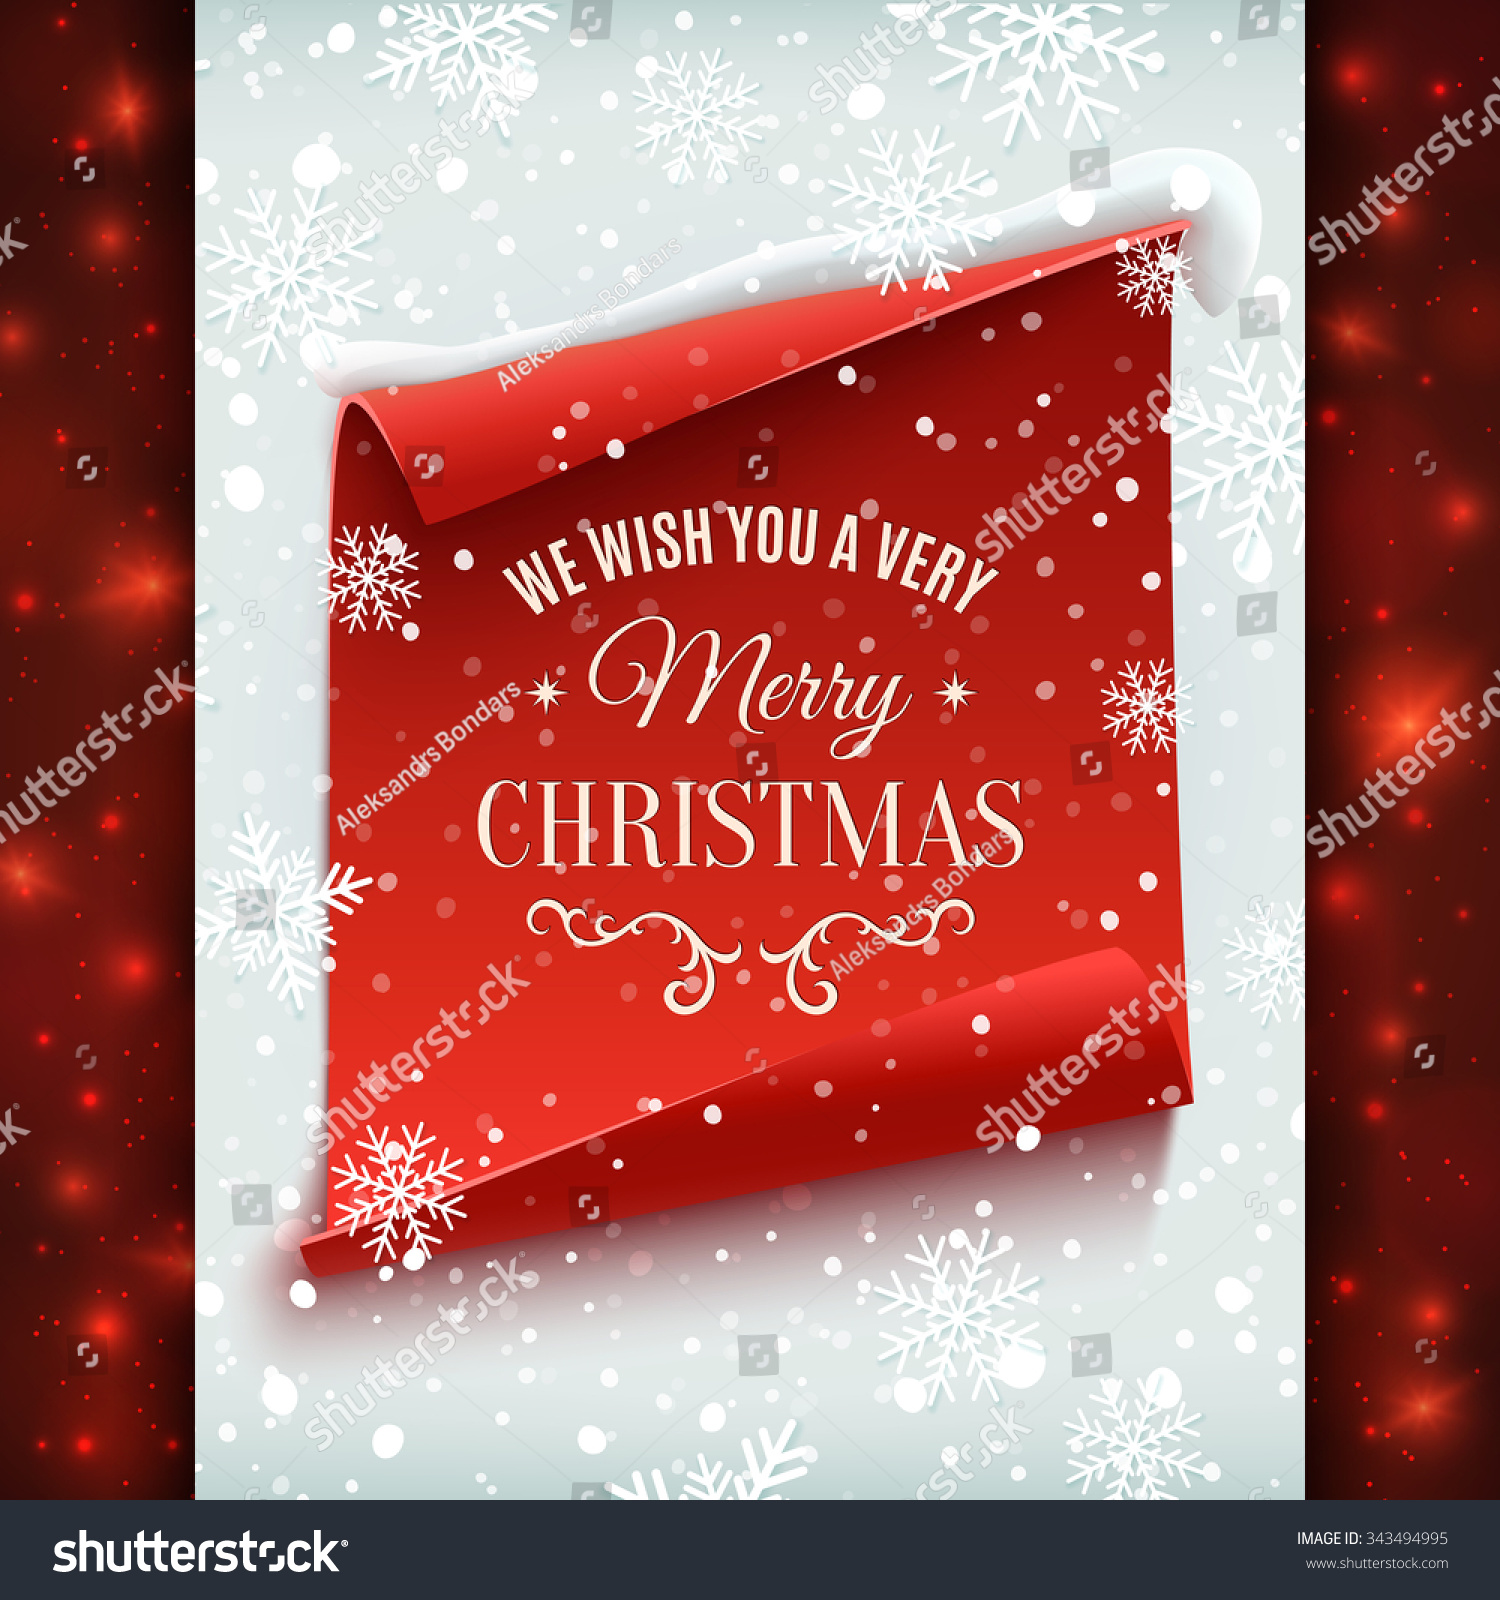 We Wish You A Very Merry Christmas, Greeting Card. Red, Curved, Paper 